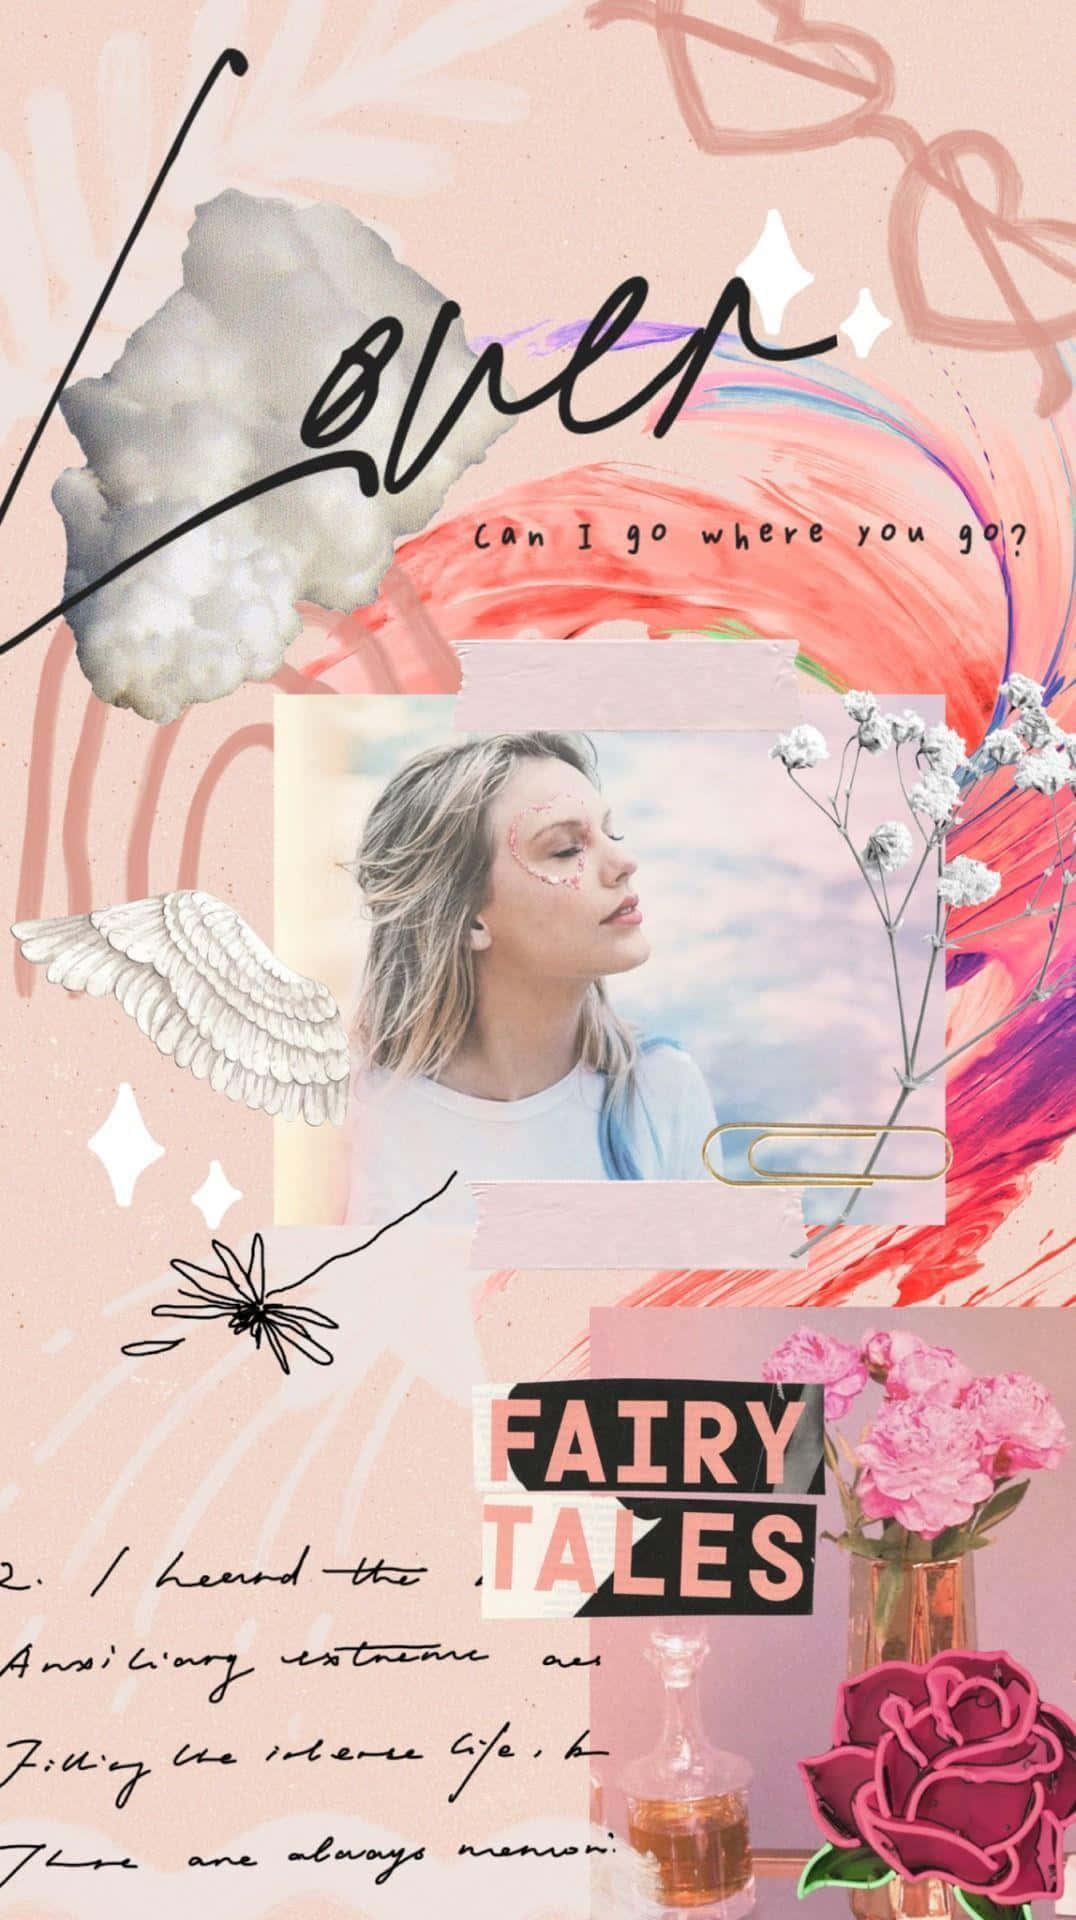 Taylor Swift Evermore Aesthetic Collage Wallpaper